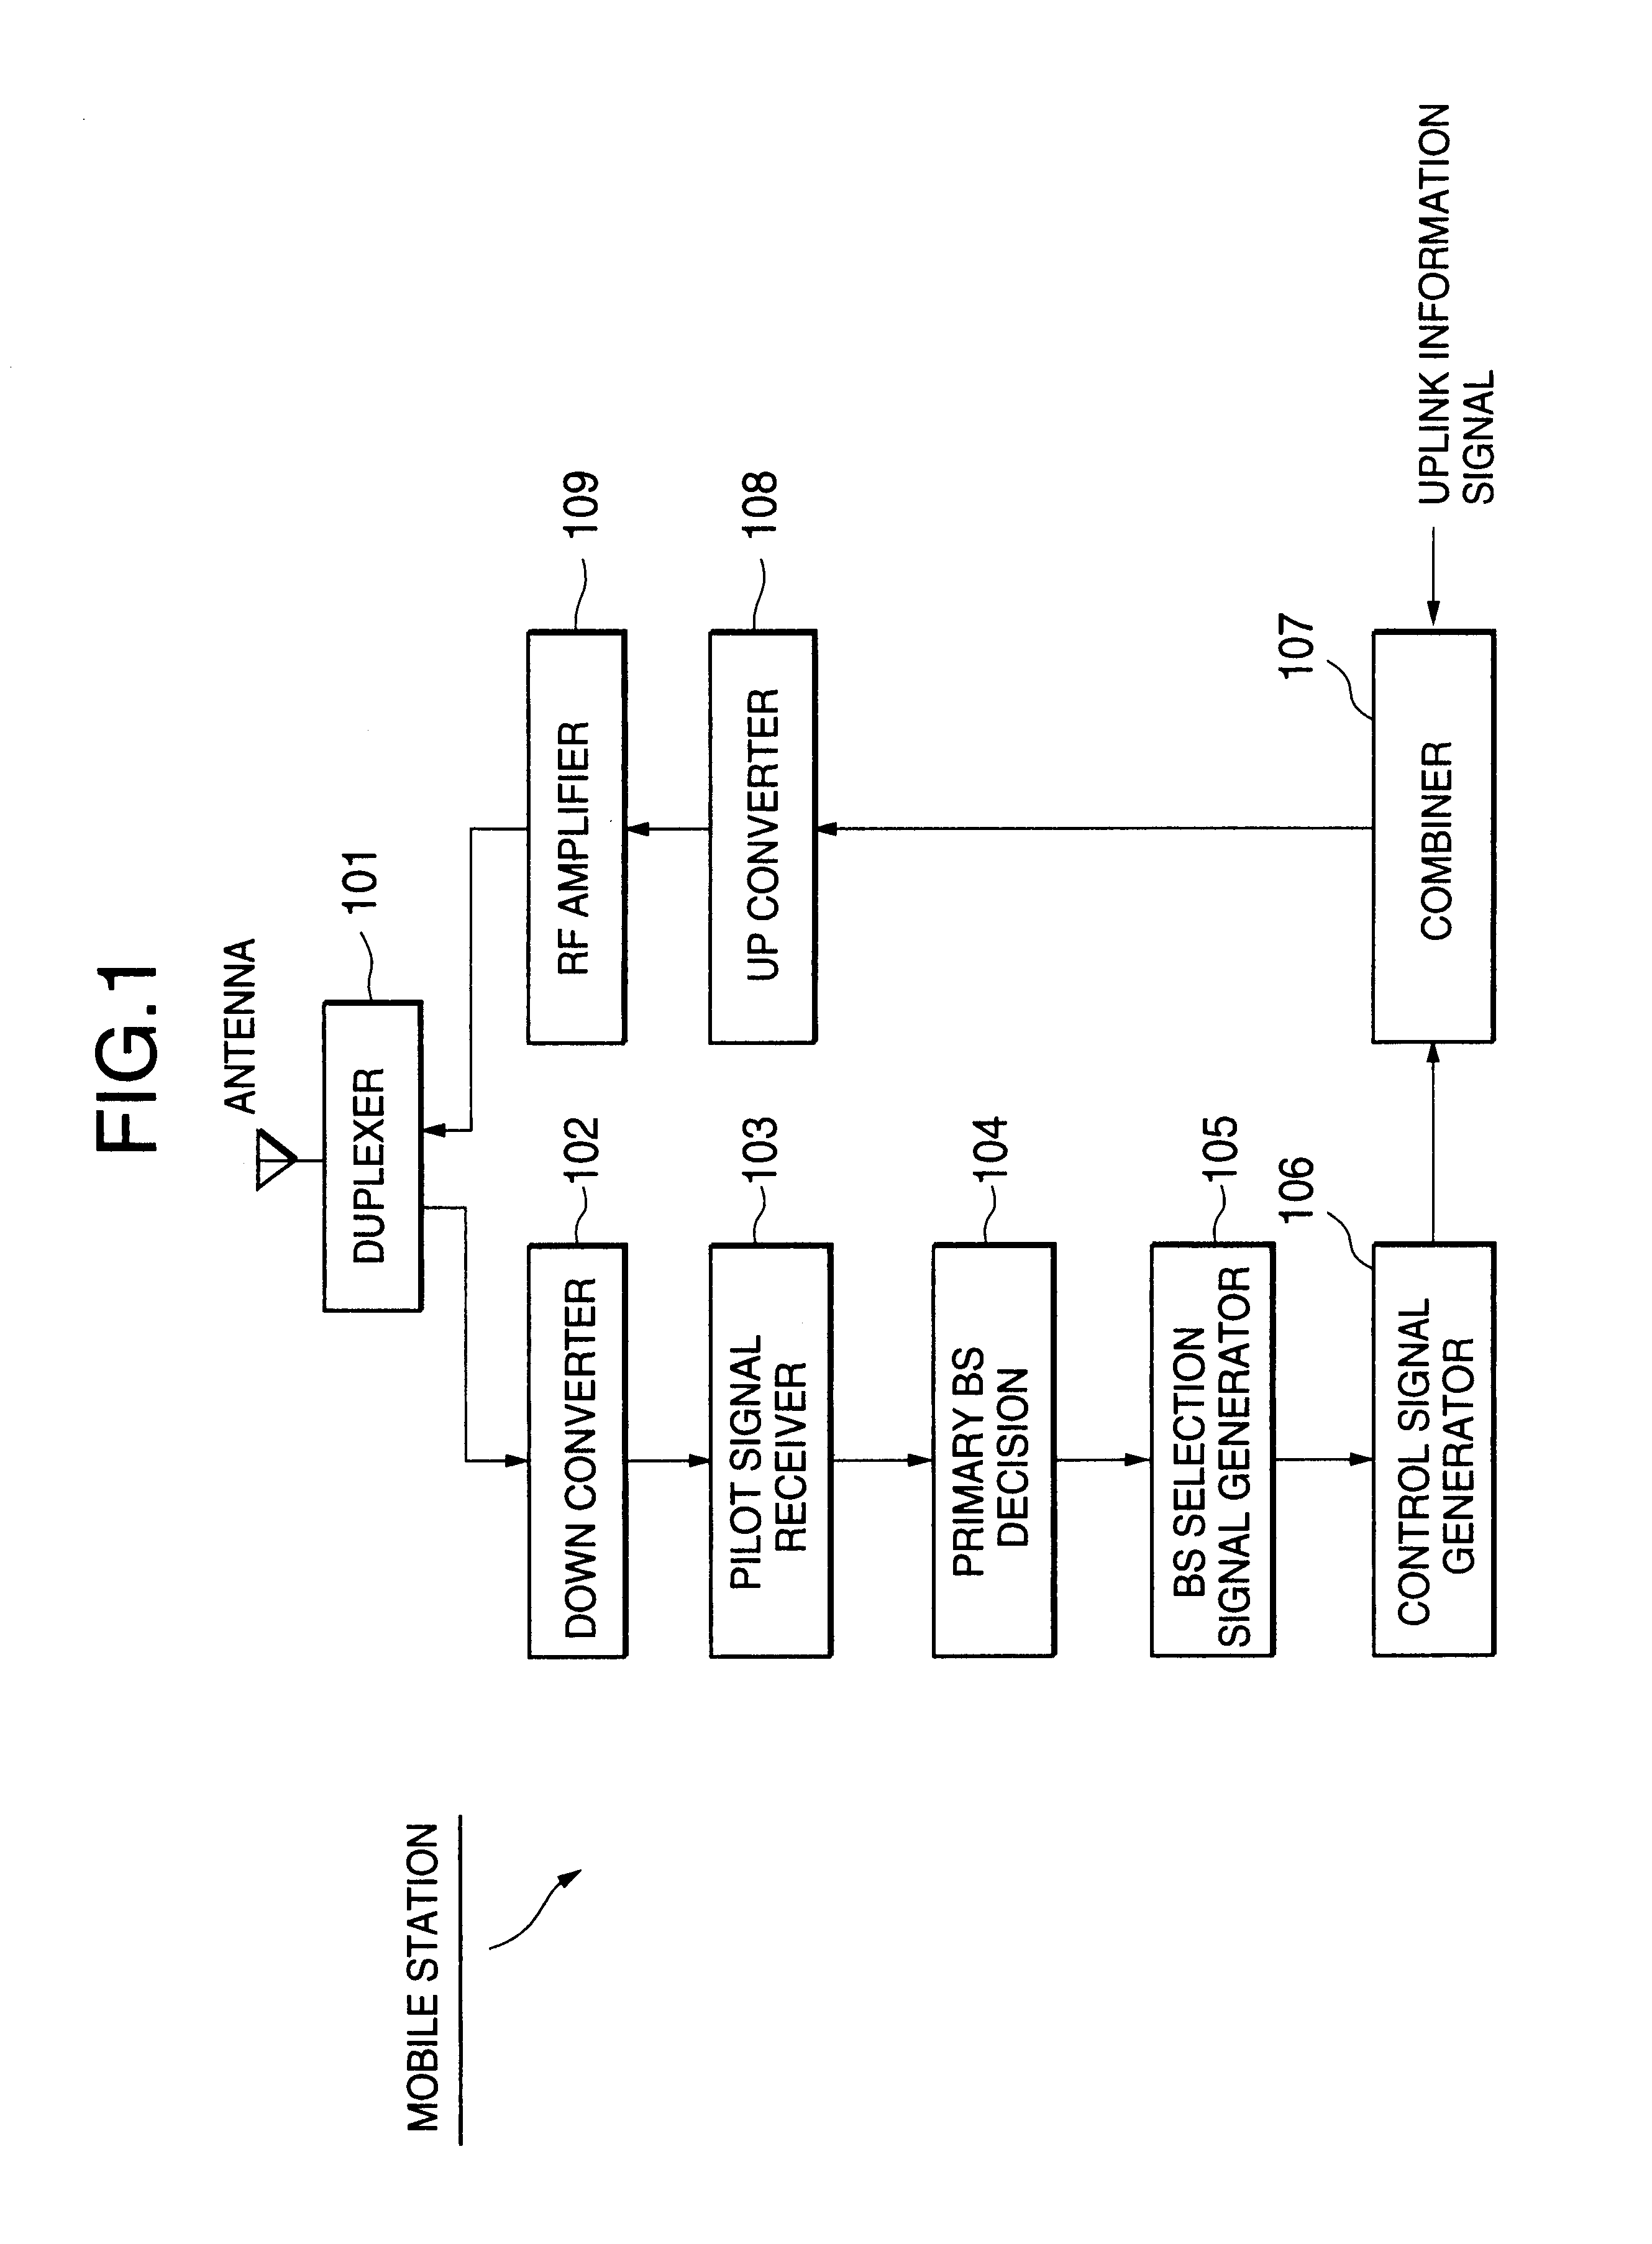 Transmission power control method and system